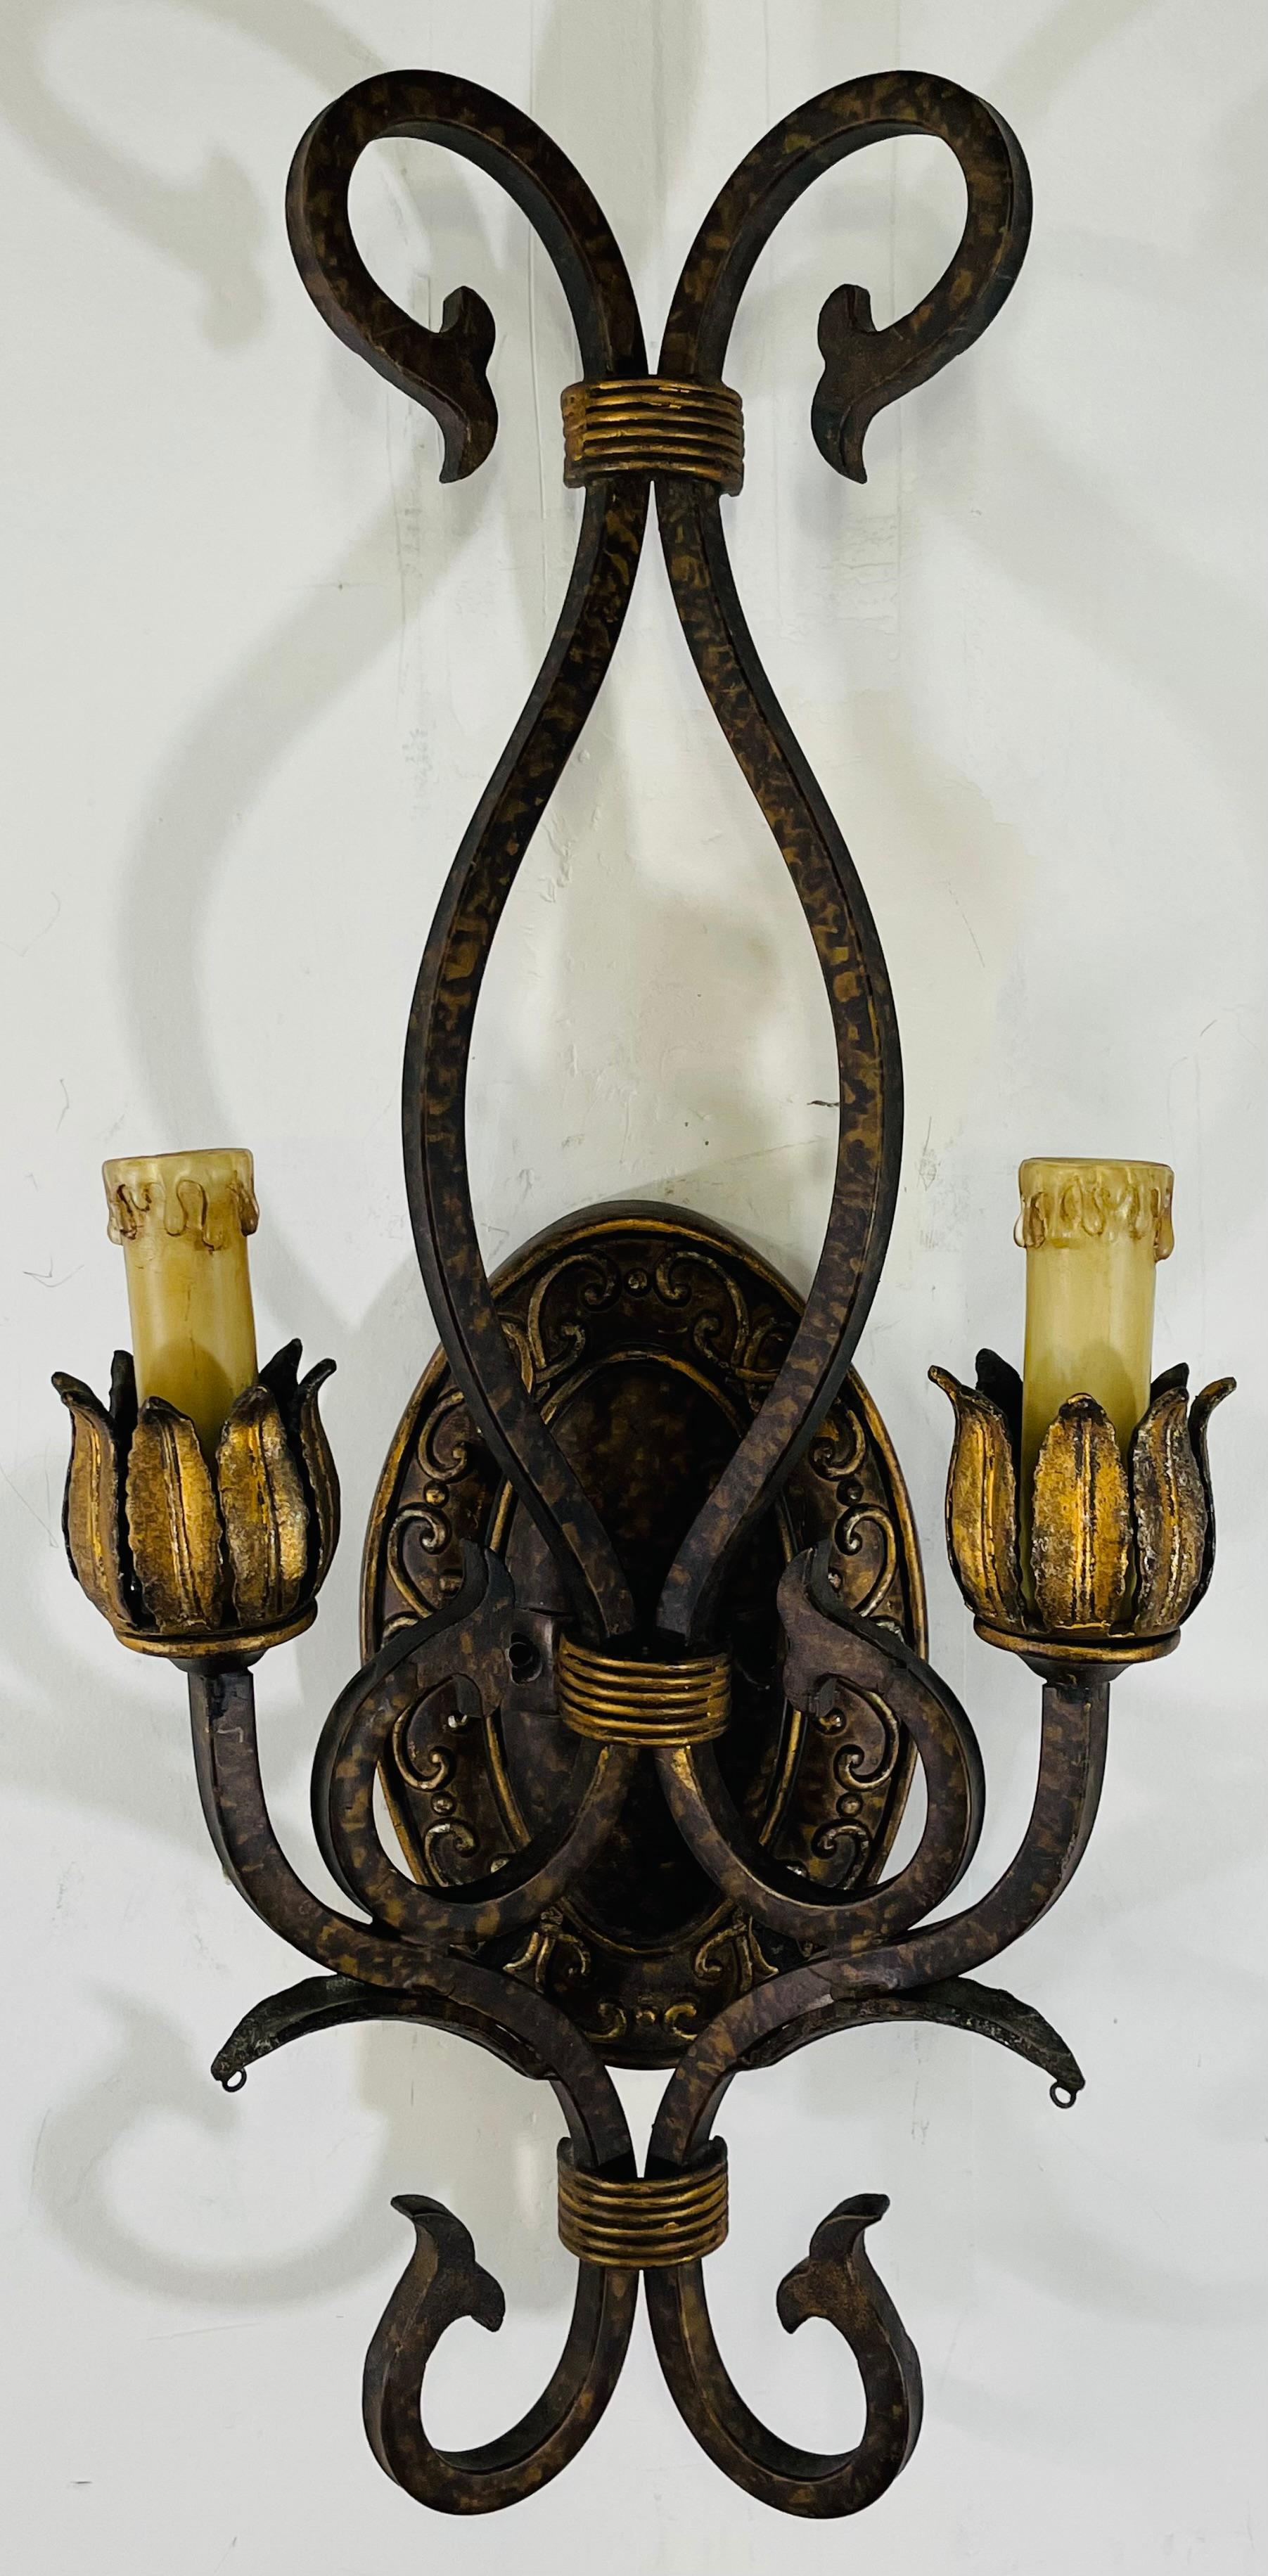 An elegant pair of French Neoclassical style sconces. The two-arm metal sconces are finely gild decorated and painted in a tortoise shell color tone adding a fashionable and stylish touch to the timeless Traditional Design of the scones. Each sconce